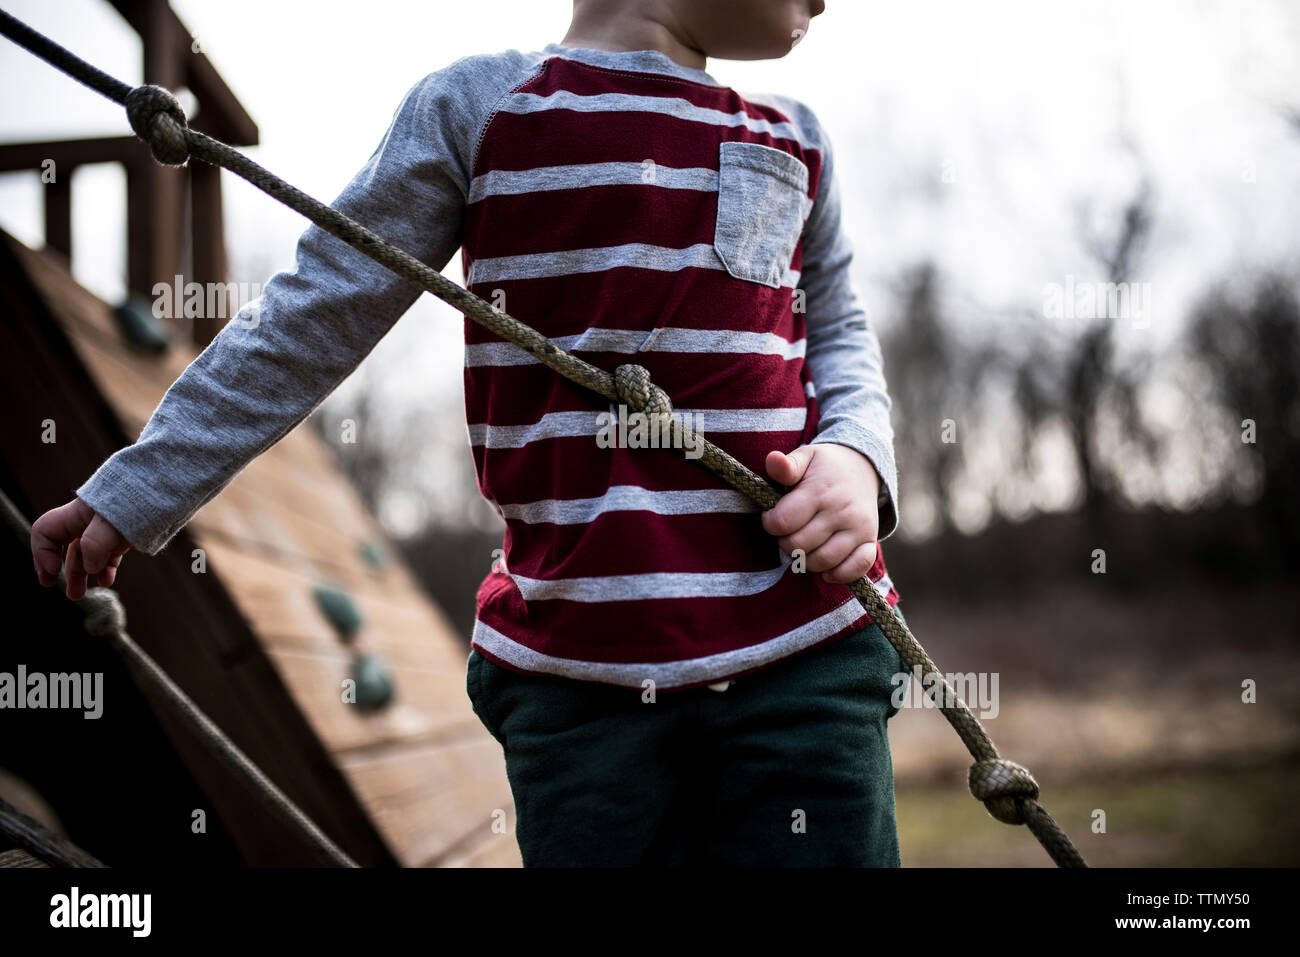 Midsection of boy holding rope at playground Stock Photo